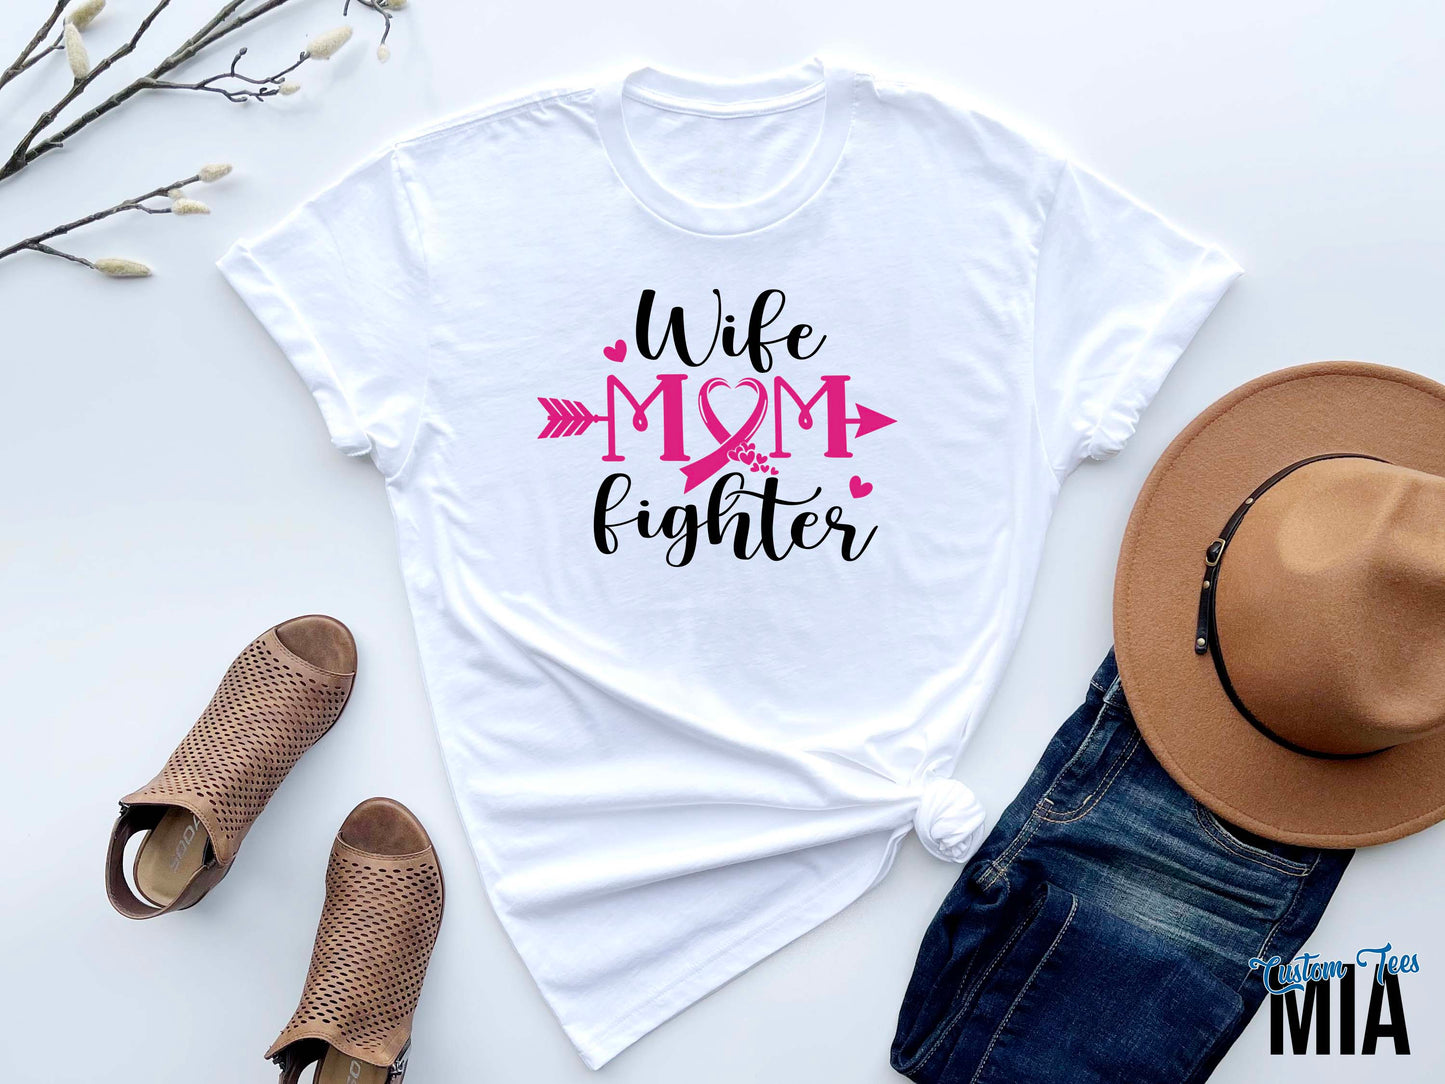 Mom and Daughter Breast Cancer Fighter Support Shirt